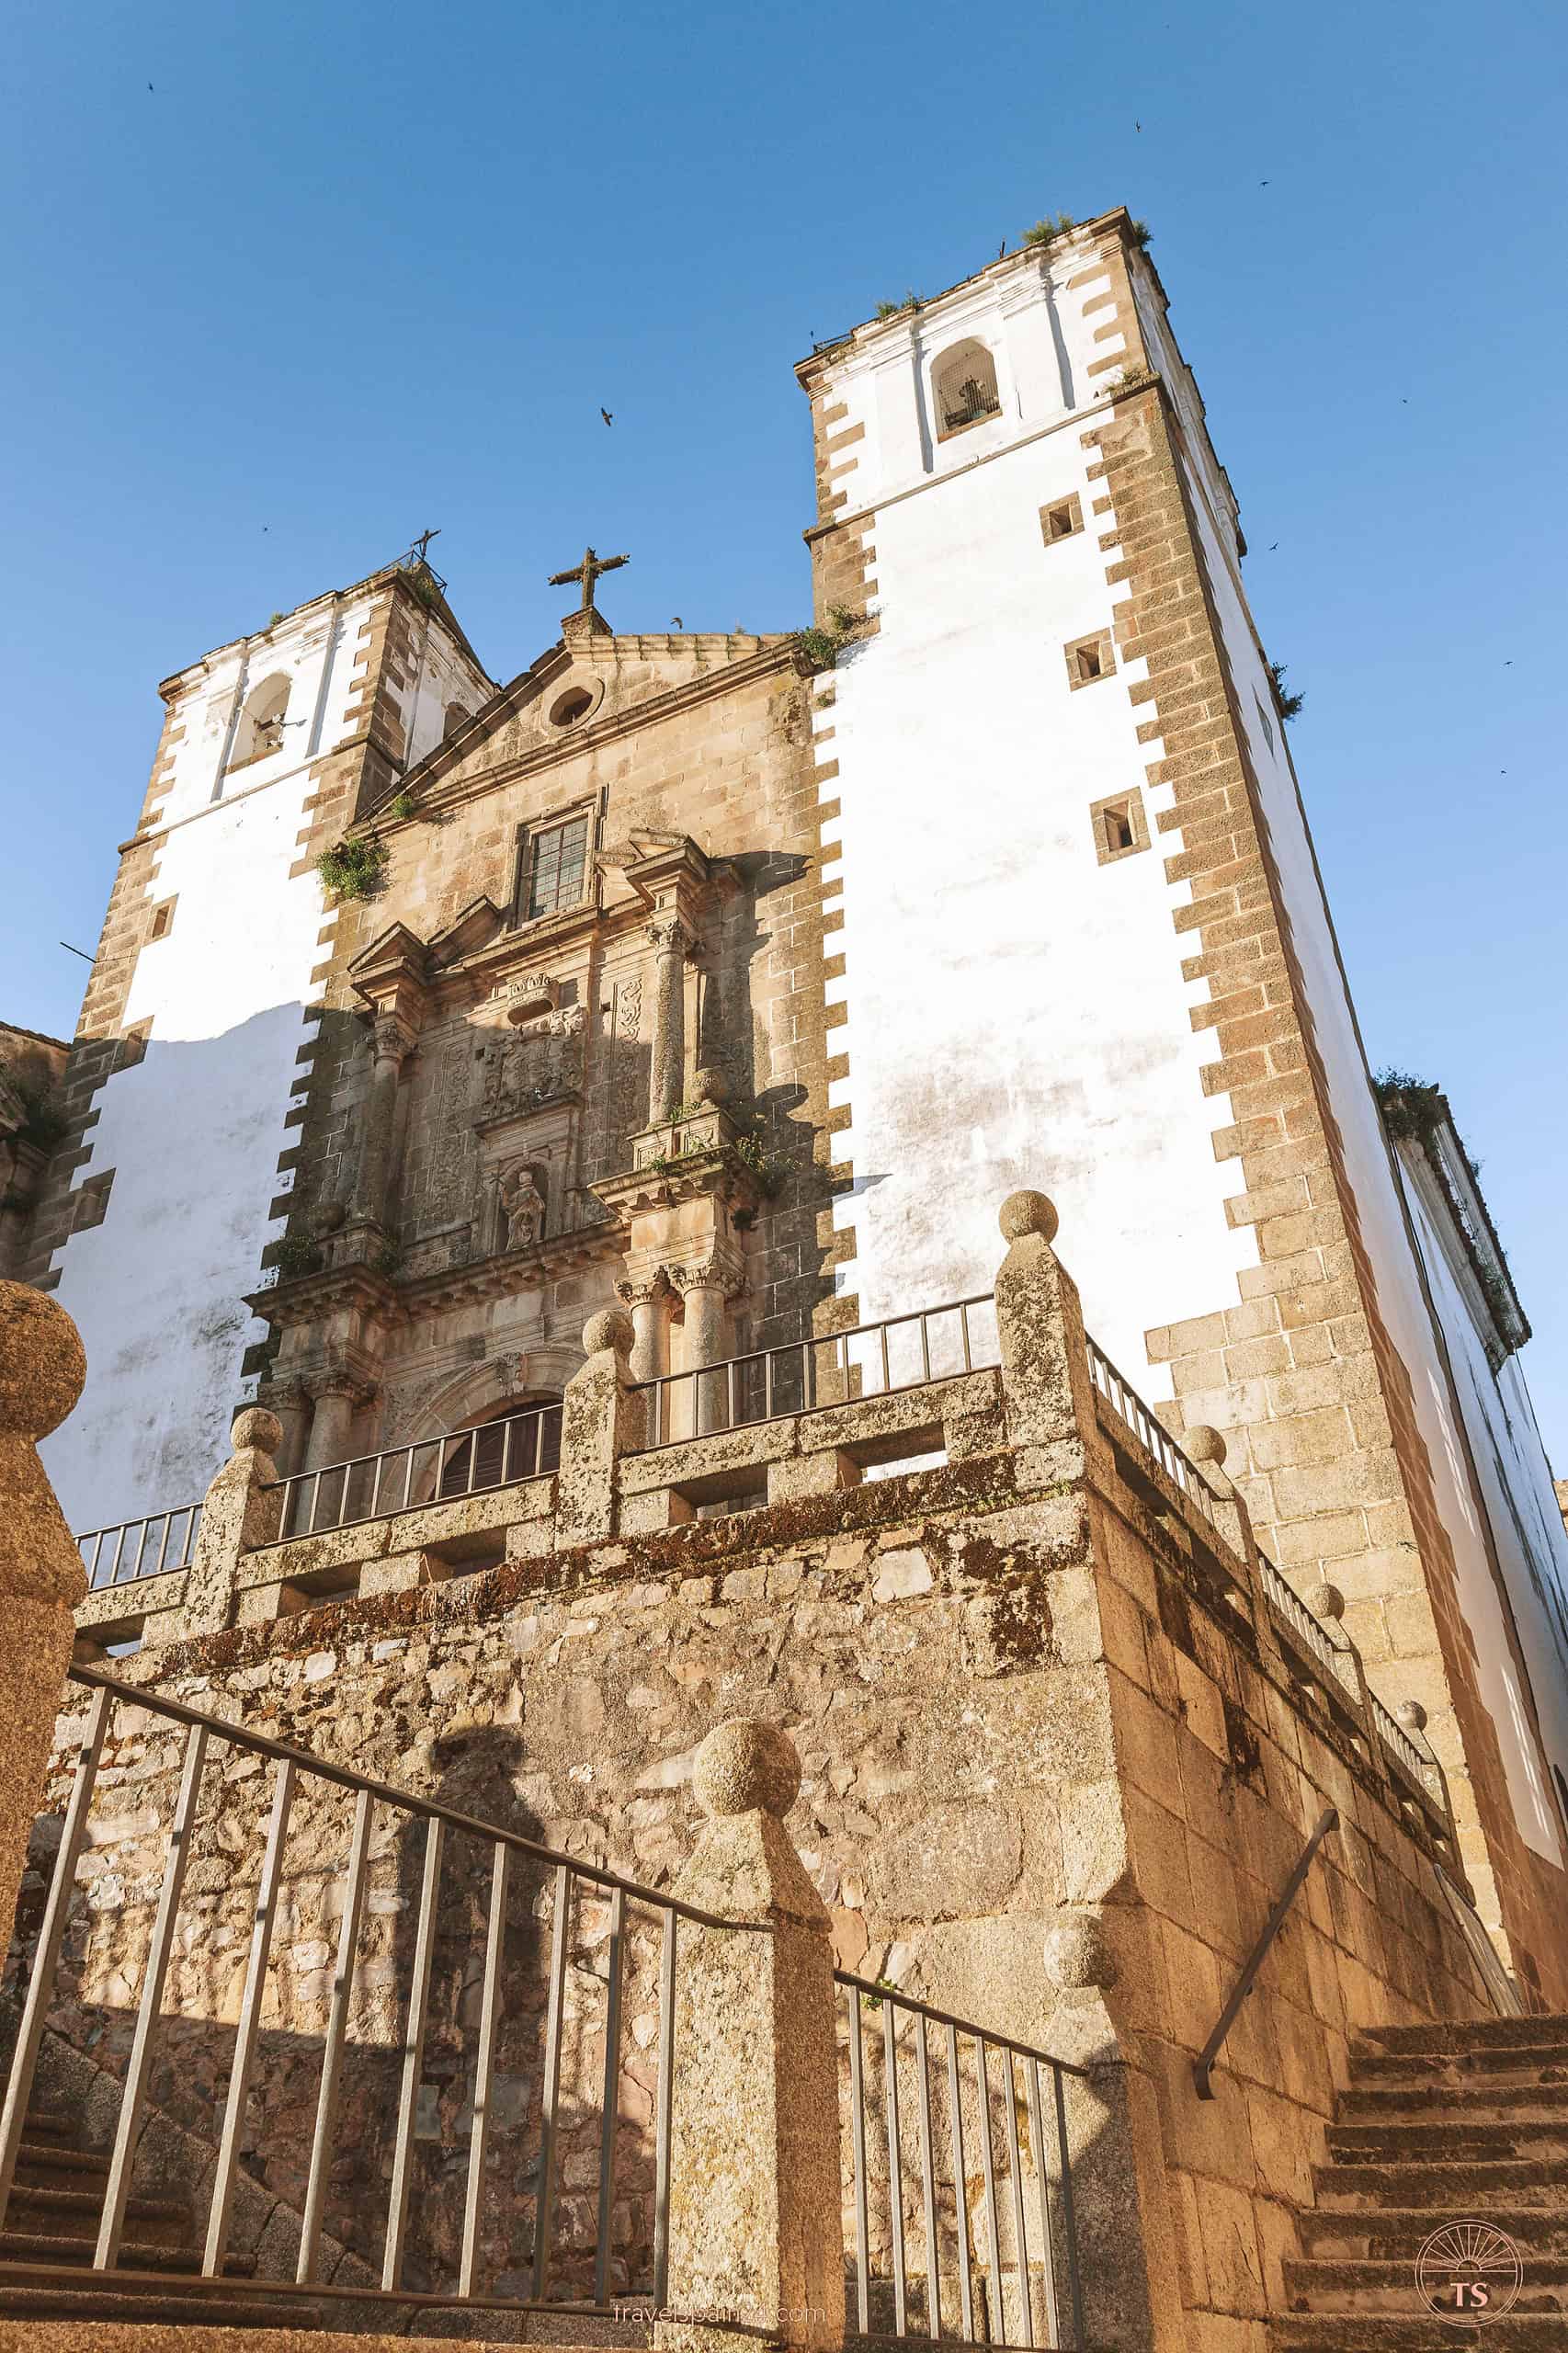 Close-up of Iglesia de San Francisco Javier in Cáceres, featuring its distinctive white bell towers on either side of the building.